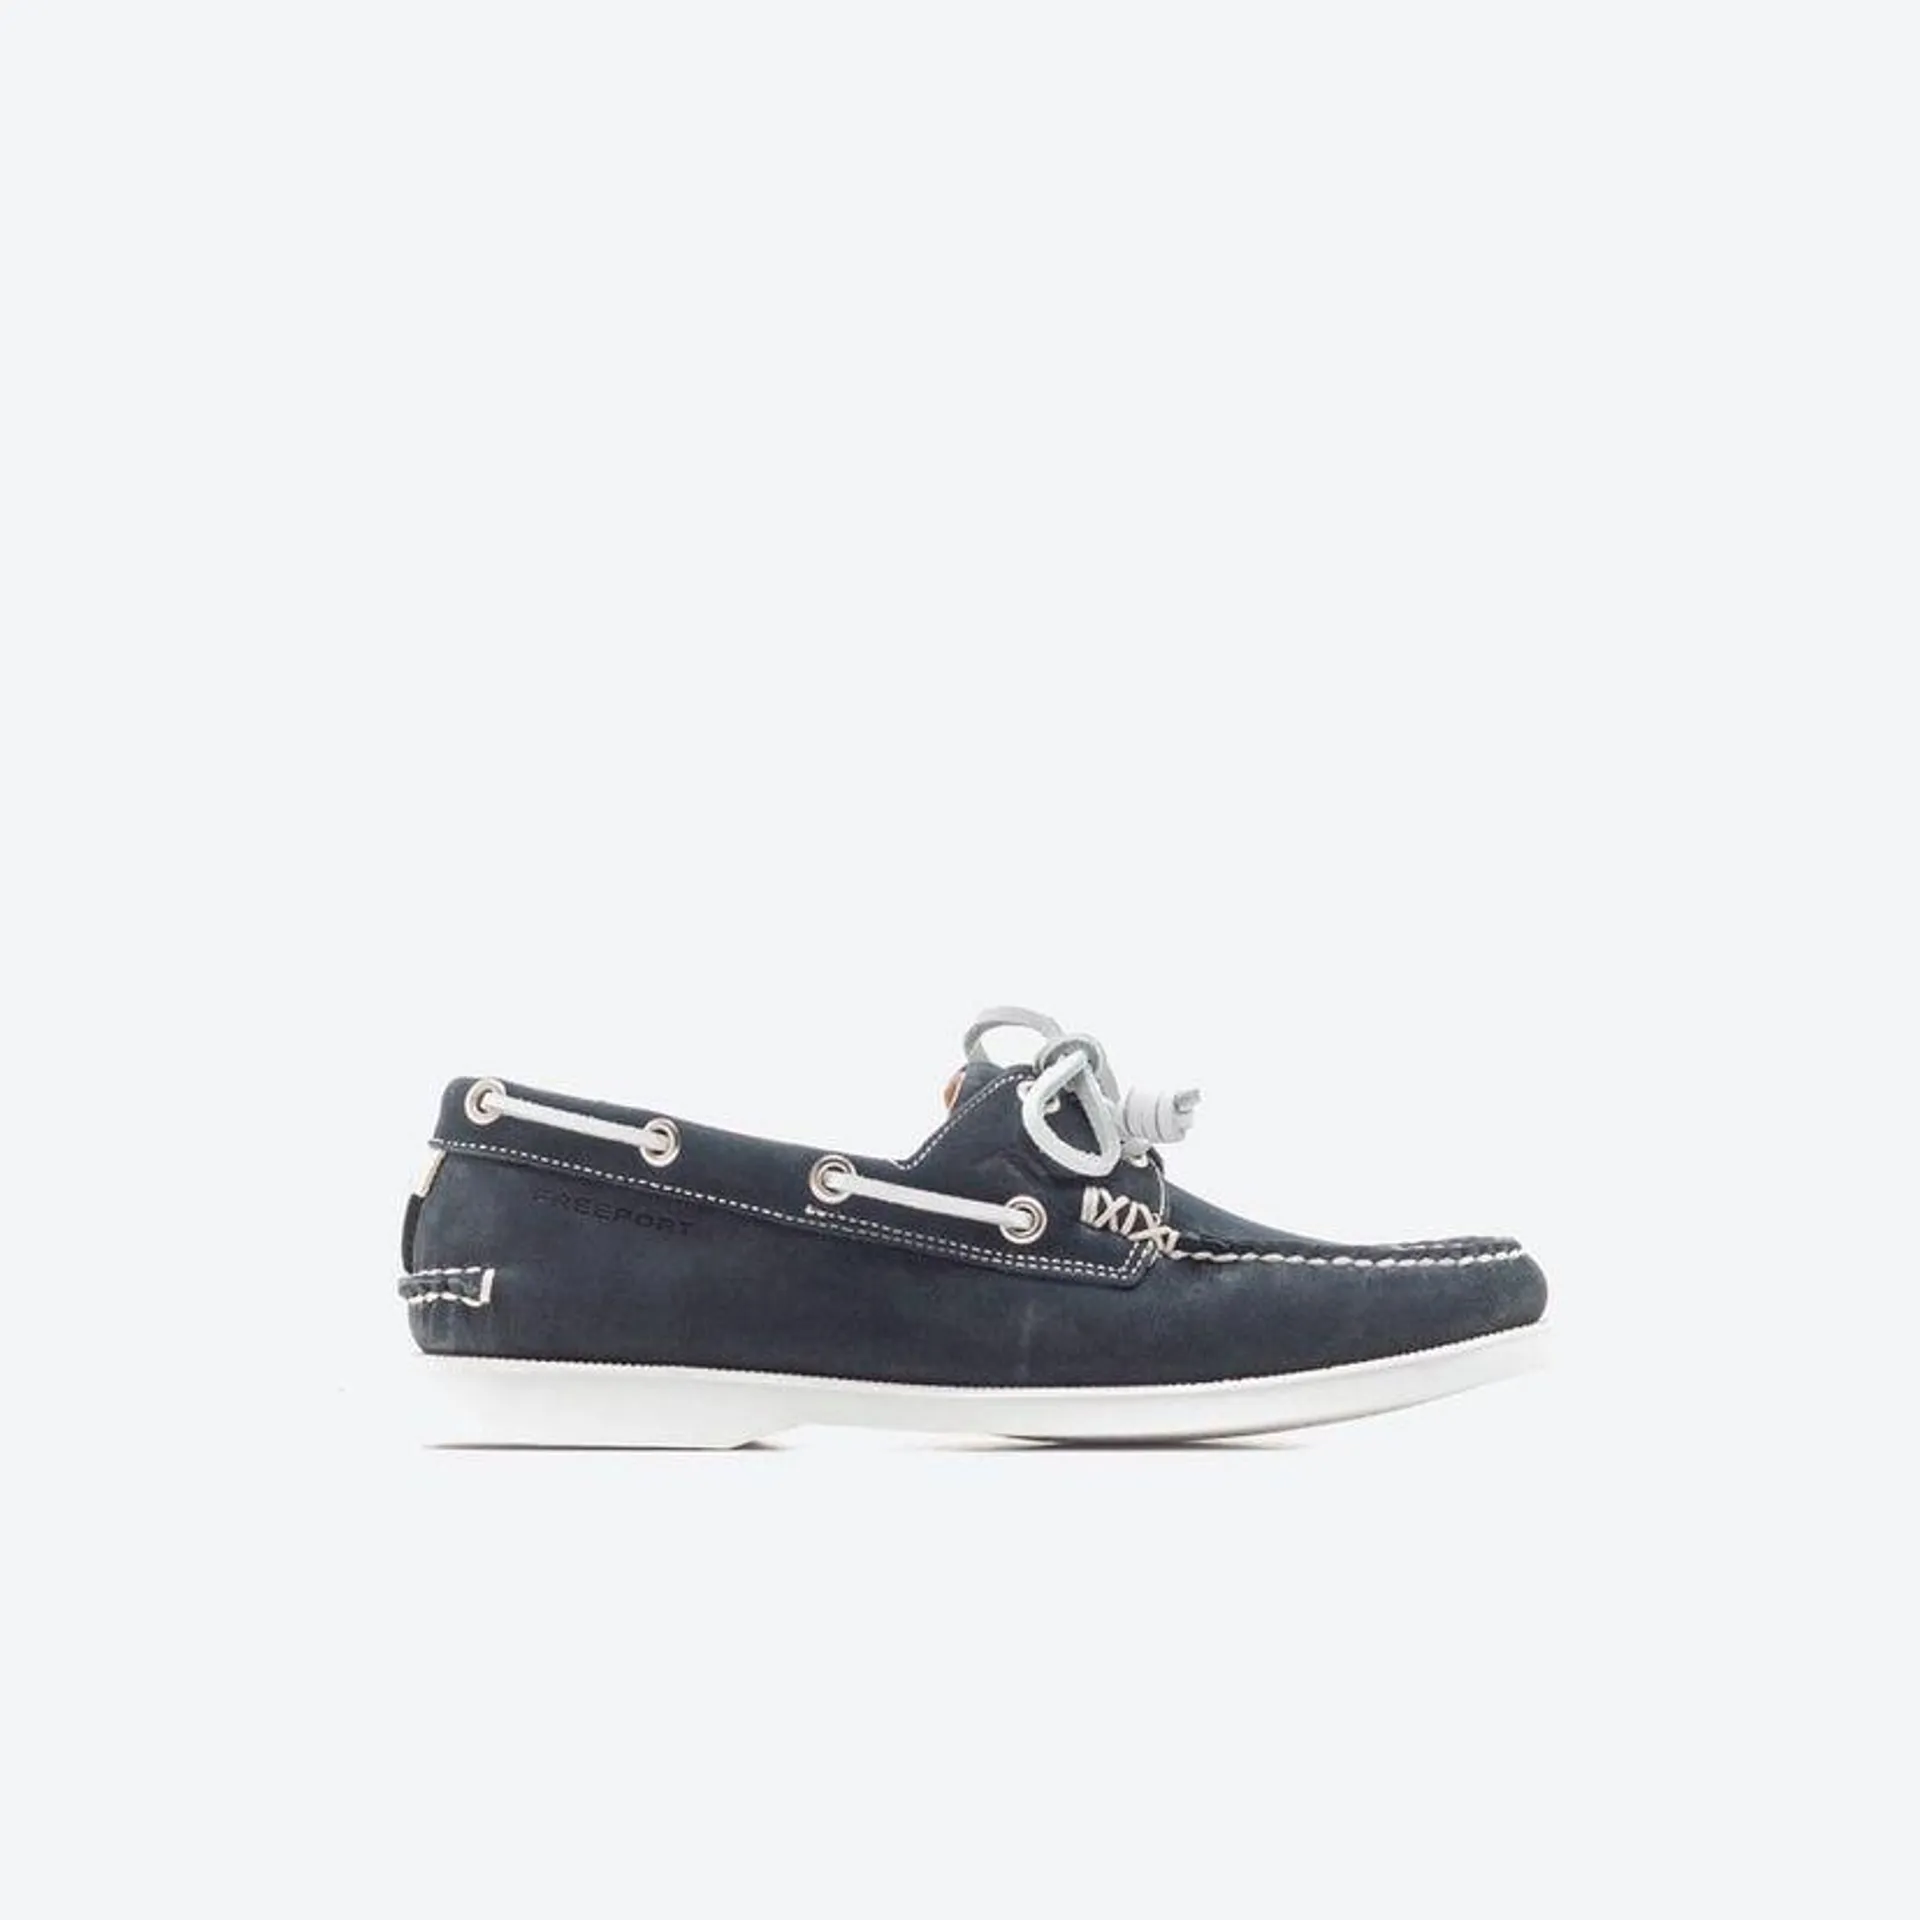 The ‘93 Classic 2 Eye Boat Shoe Zapato Casual Mujer Freeport Z1ie Azul Naval